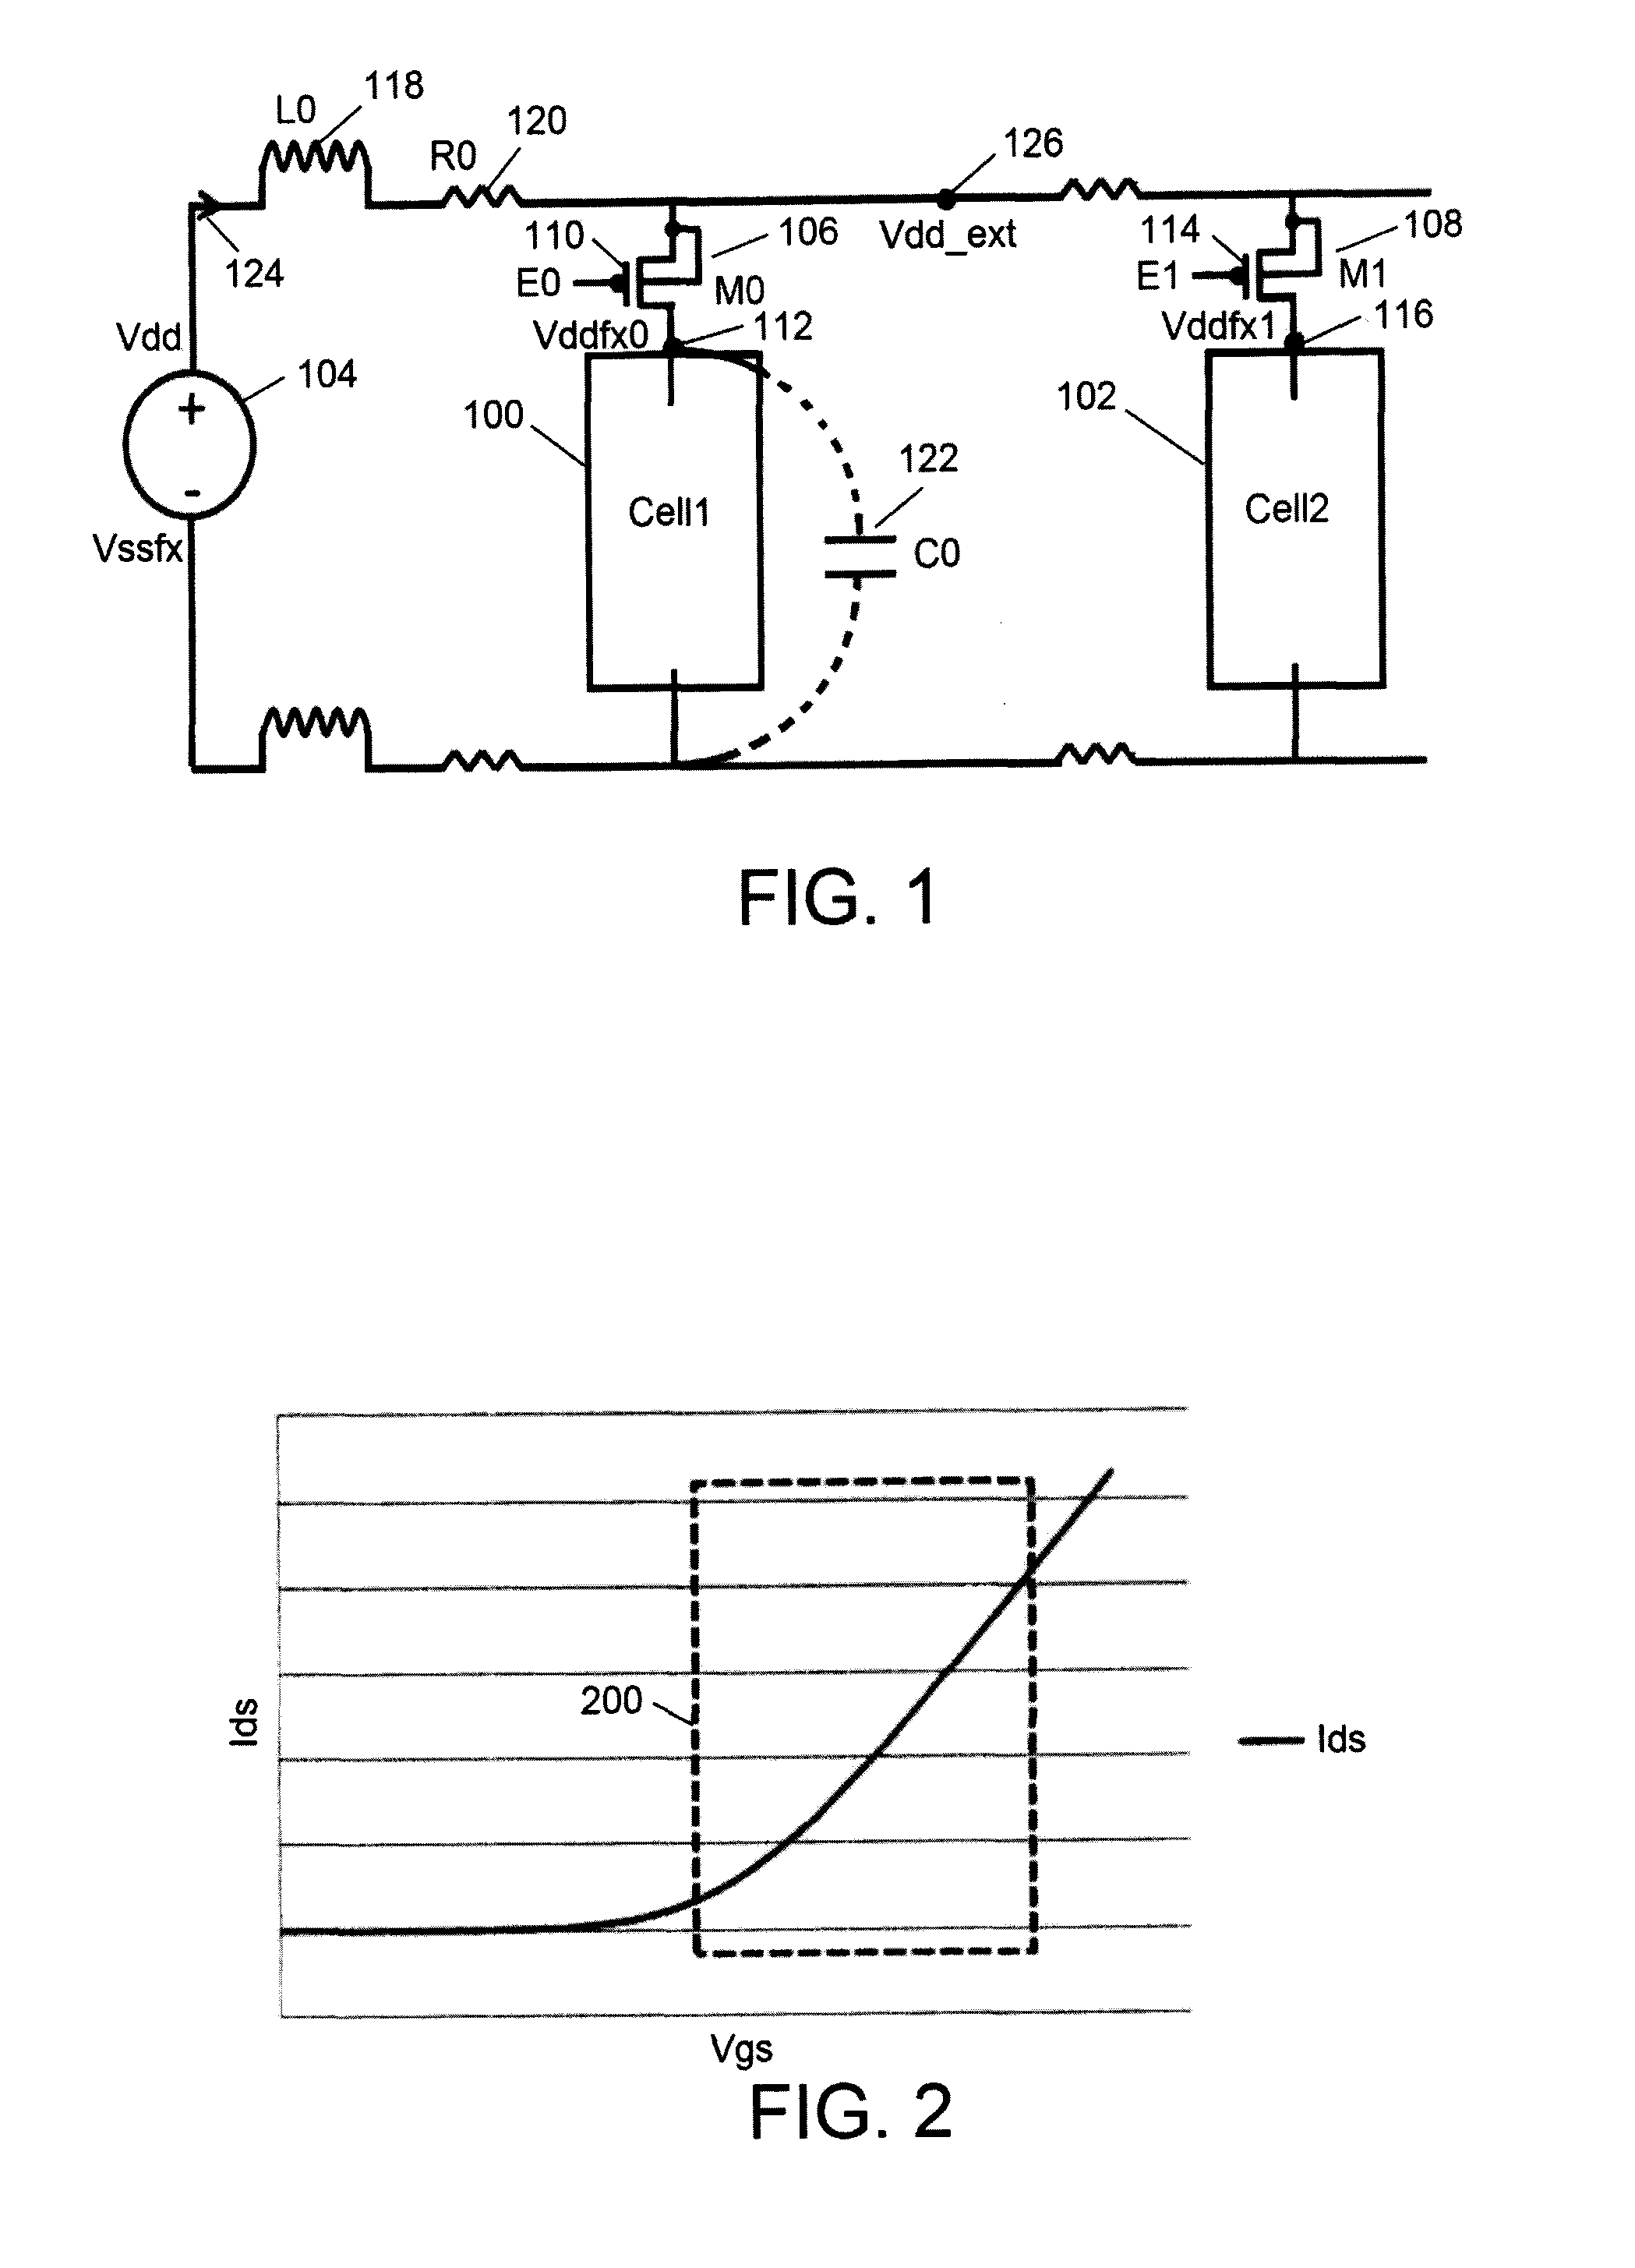 Systems and methods for suppressing rush current noise in a power switch cell